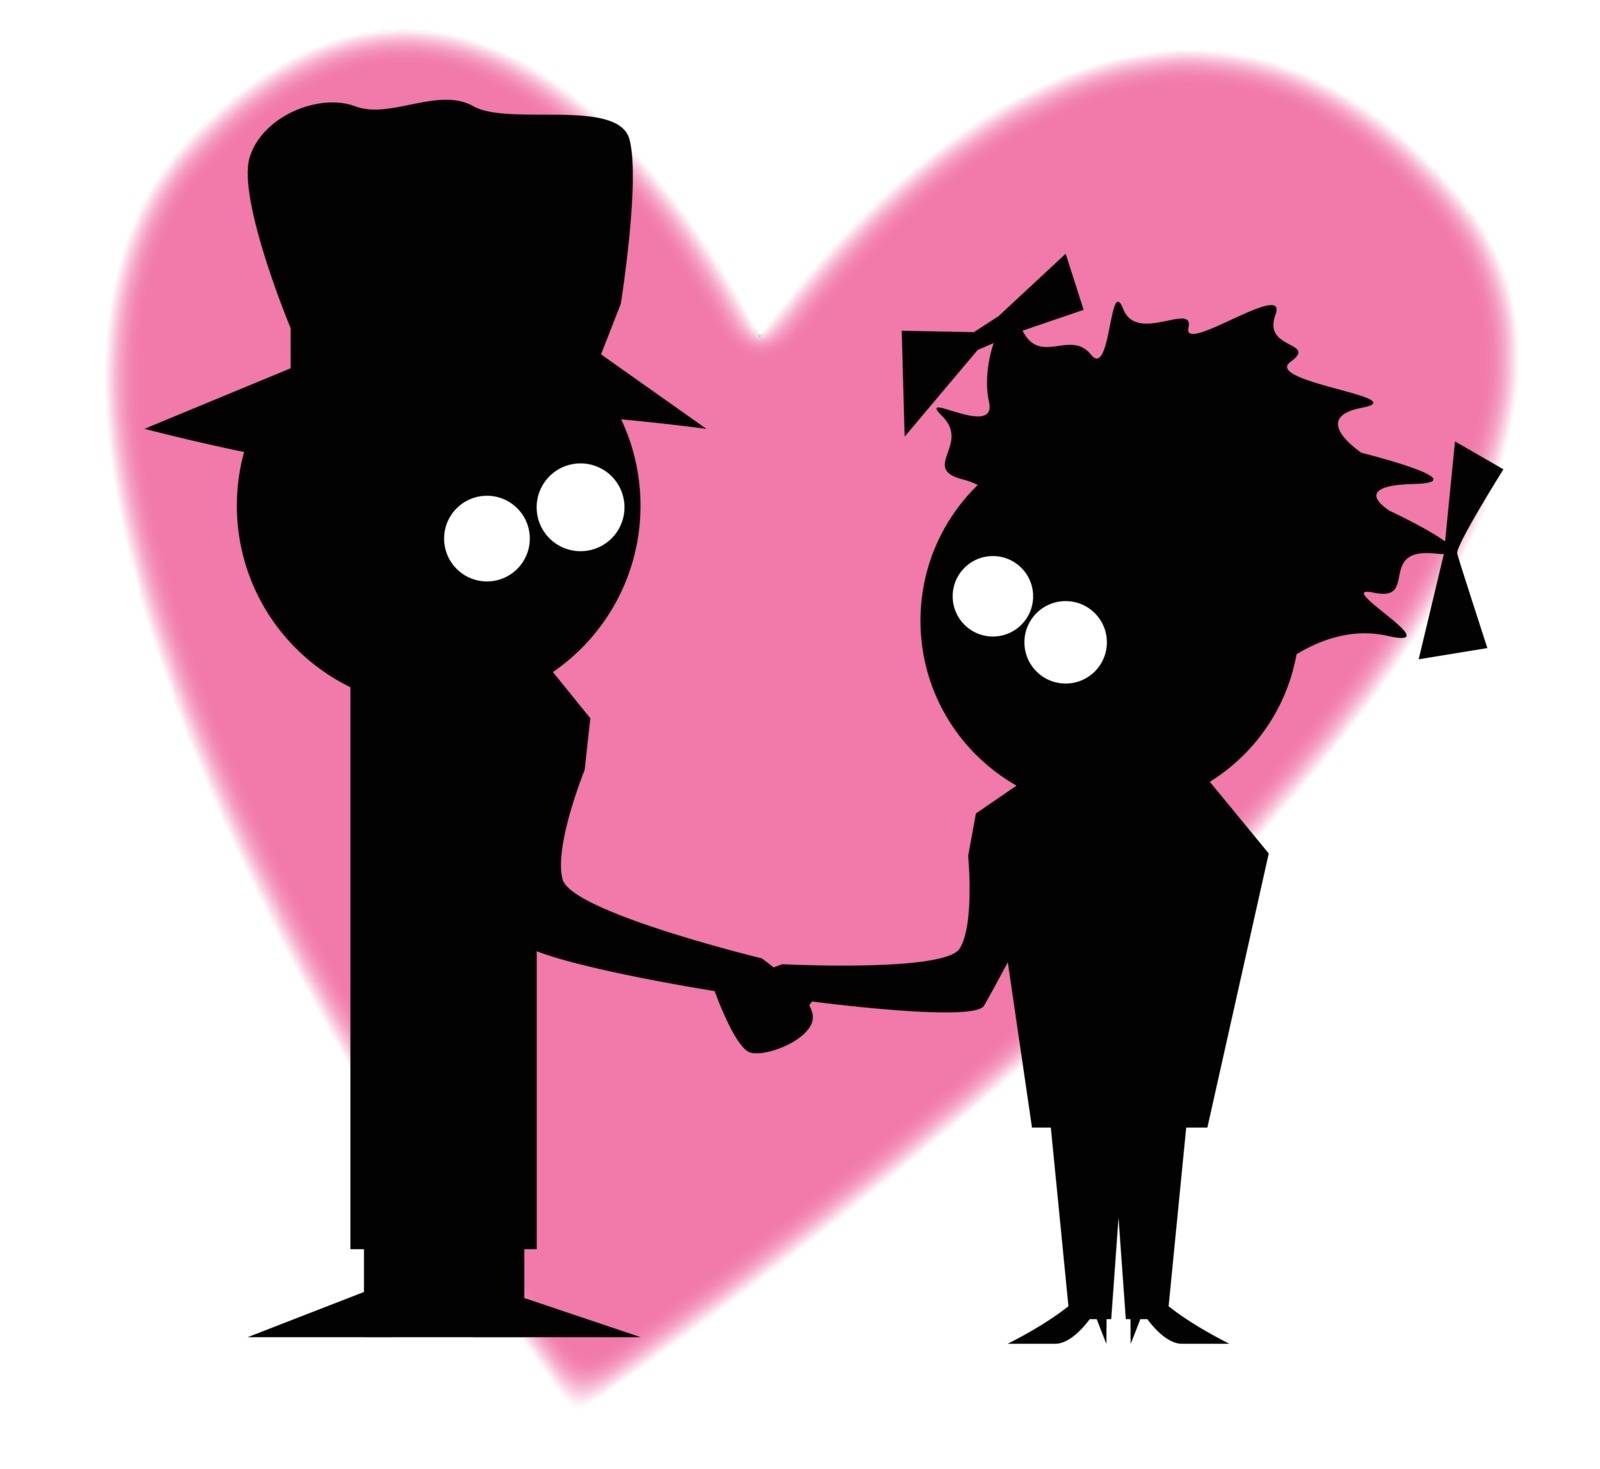 Silhouette of a cartoon character holding the hand of his girl friend